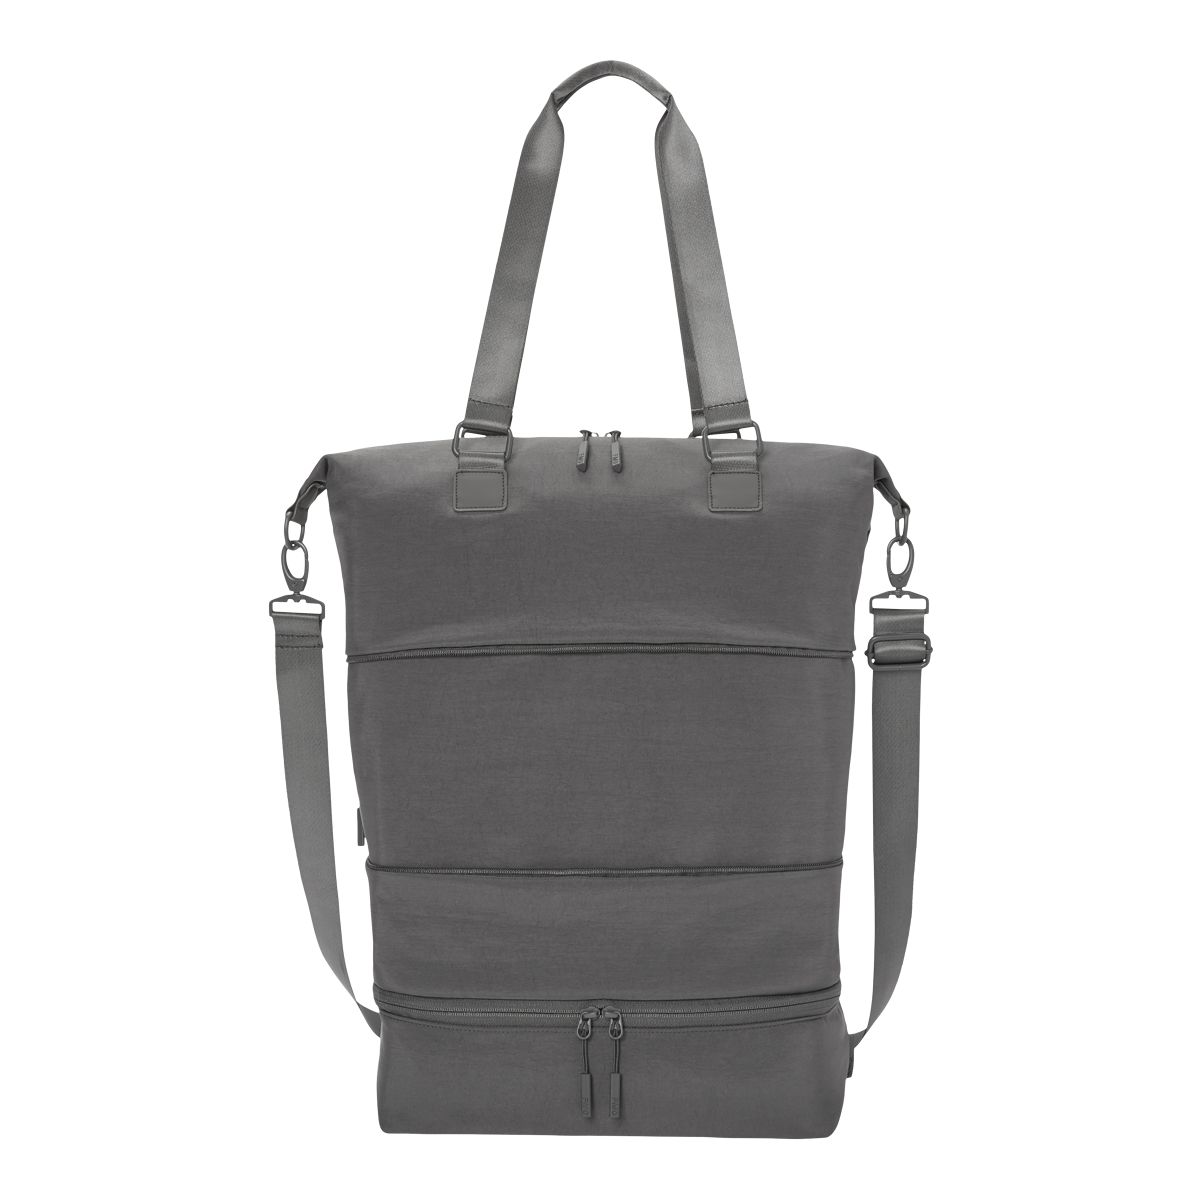 FWD Expandable Tote Bag 2.0  Lightweight